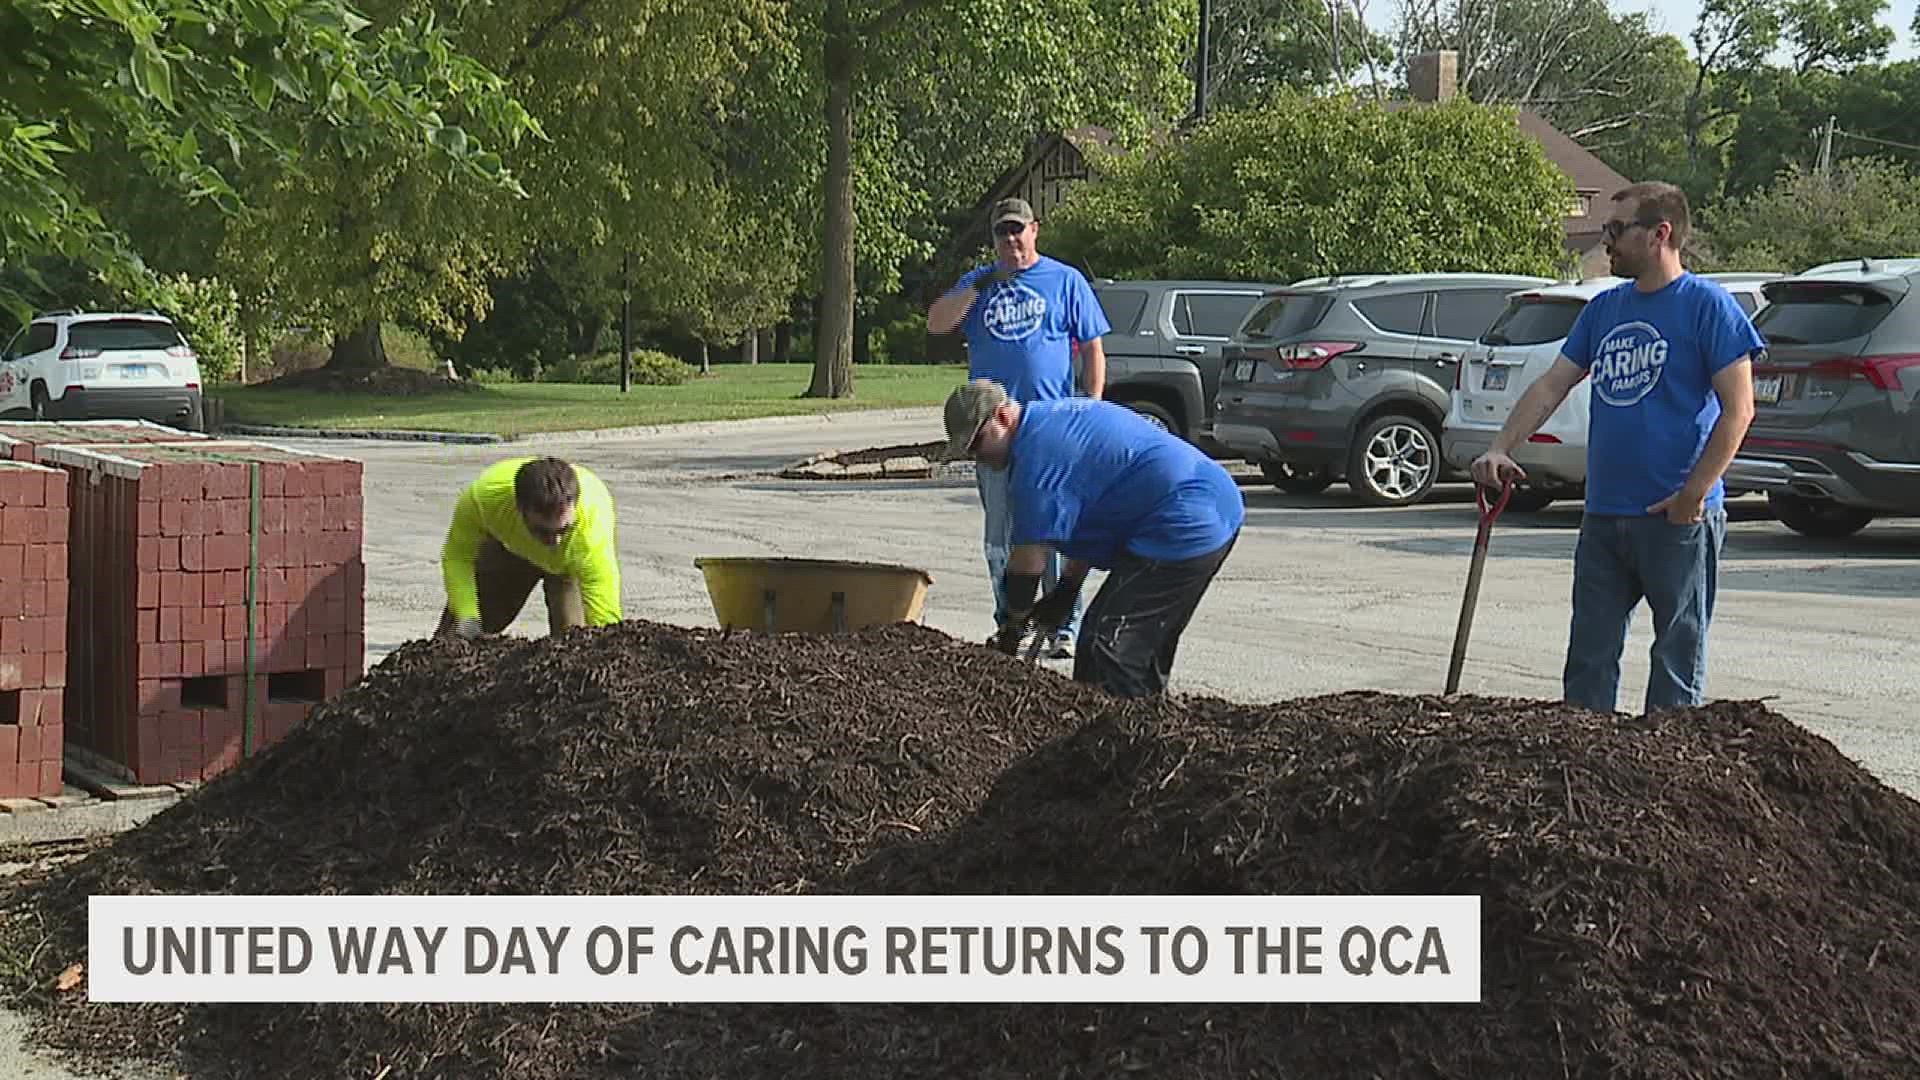 Around 1500 volunteers turned out for the charitable event across the Quad Cities. Volunteers say it was all worth it.